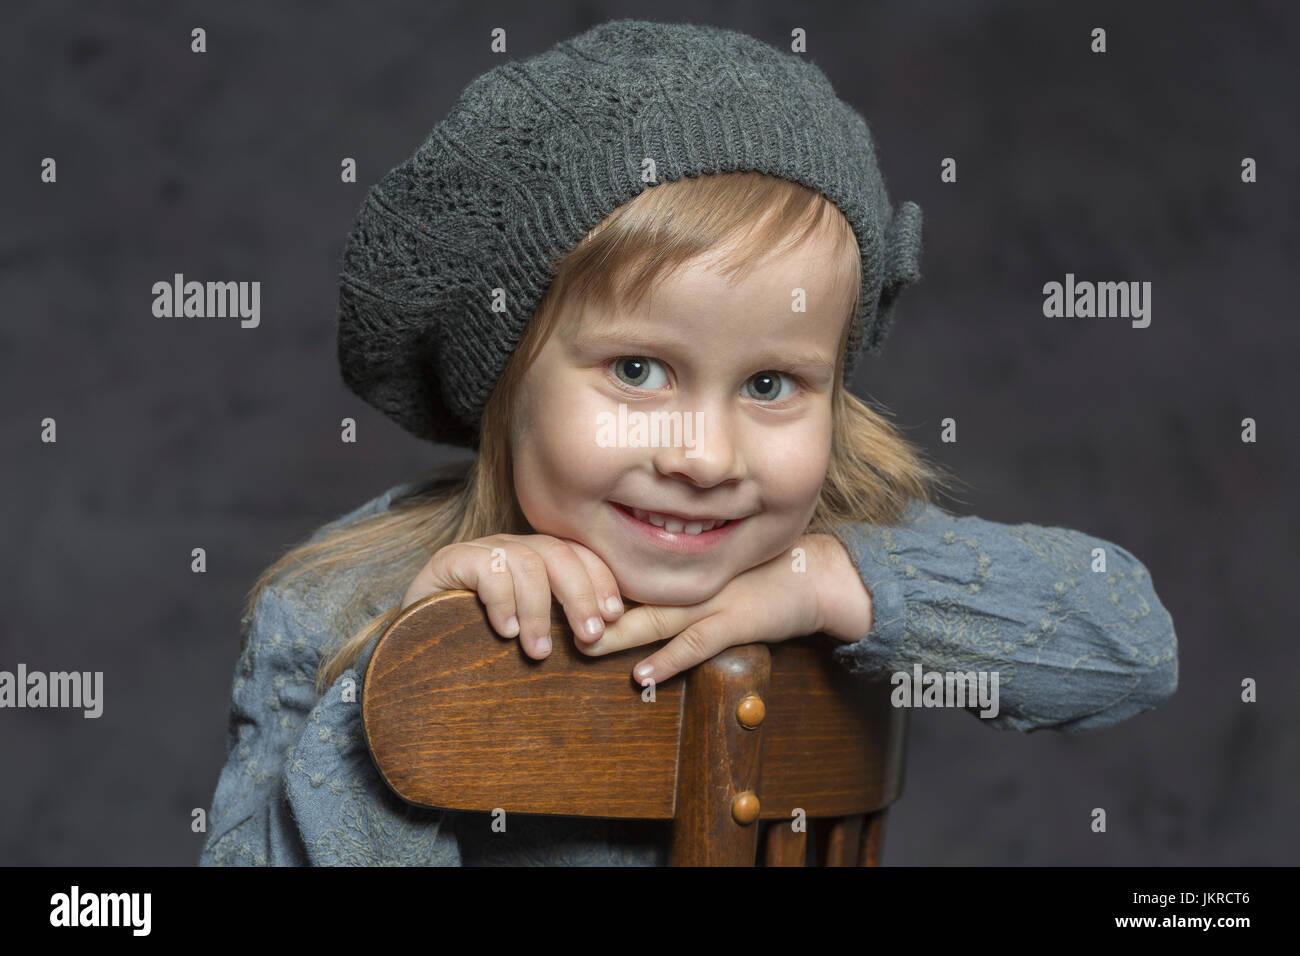 Portrait of smiling girl wearing knit hat sitting on wooden chair against gray background Stock Photo